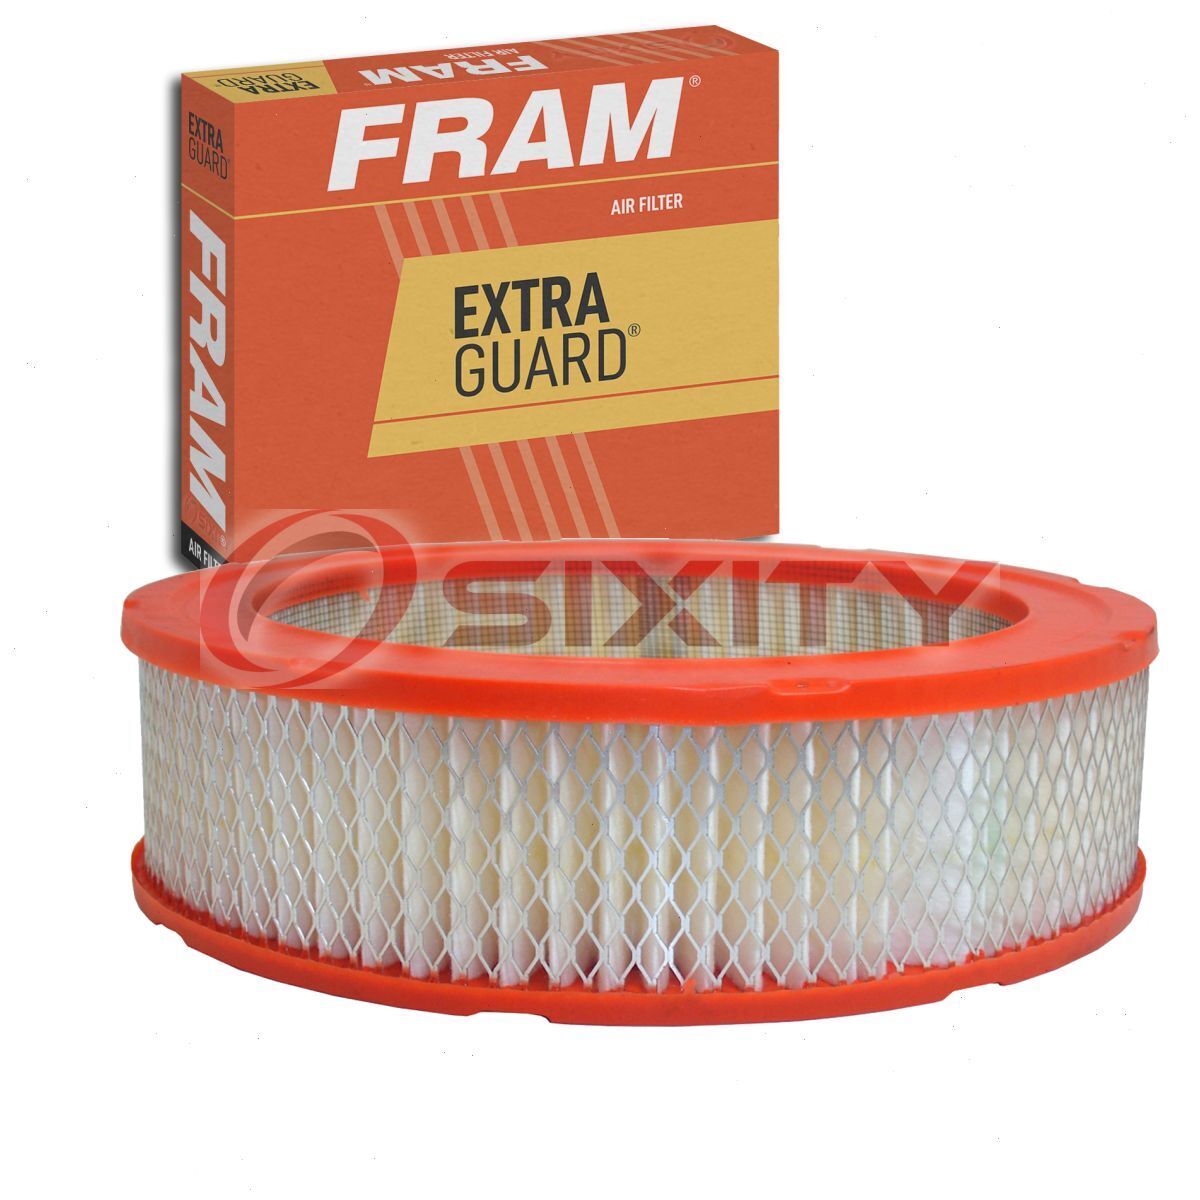 FRAM Extra Guard Air Filter for 1946-1947 Dodge WD21 Intake Inlet Manifold kz